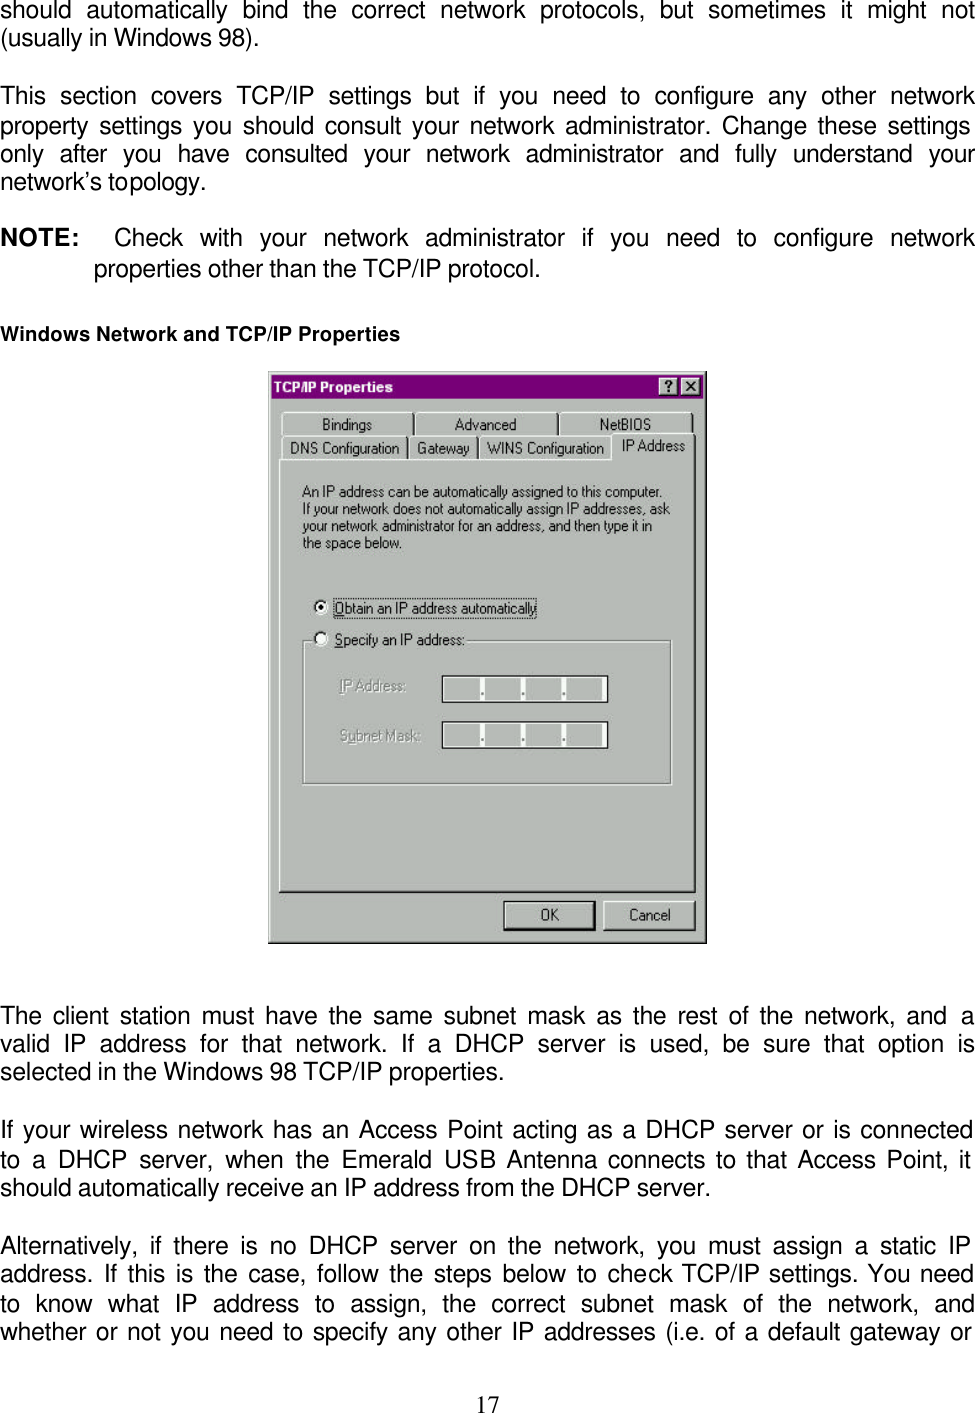    17should automatically bind the correct network protocols, but sometimes it might not (usually in Windows 98).  This section covers TCP/IP settings but if you need to configure any other network property settings you should consult your network administrator. Change these settings only after you have consulted your network administrator and fully understand your network’s topology.  NOTE:  Check with your network administrator if you need to configure network properties other than the TCP/IP protocol.   Windows Network and TCP/IP Properties    The client station must have the same subnet mask as the rest of the network, and a valid IP address for that network. If a DHCP server is used, be sure that option is selected in the Windows 98 TCP/IP properties.   If your wireless network has an Access Point acting as a DHCP server or is connected to a DHCP server, when the Emerald USB Antenna connects to that Access Point, it should automatically receive an IP address from the DHCP server.   Alternatively, if there is no DHCP server on the network, you must assign a static IP address. If this is the case, follow the steps below to check TCP/IP settings. You need to know what IP address to assign, the correct subnet mask of the network, and whether or not you need to specify any other IP addresses (i.e. of a default gateway or 